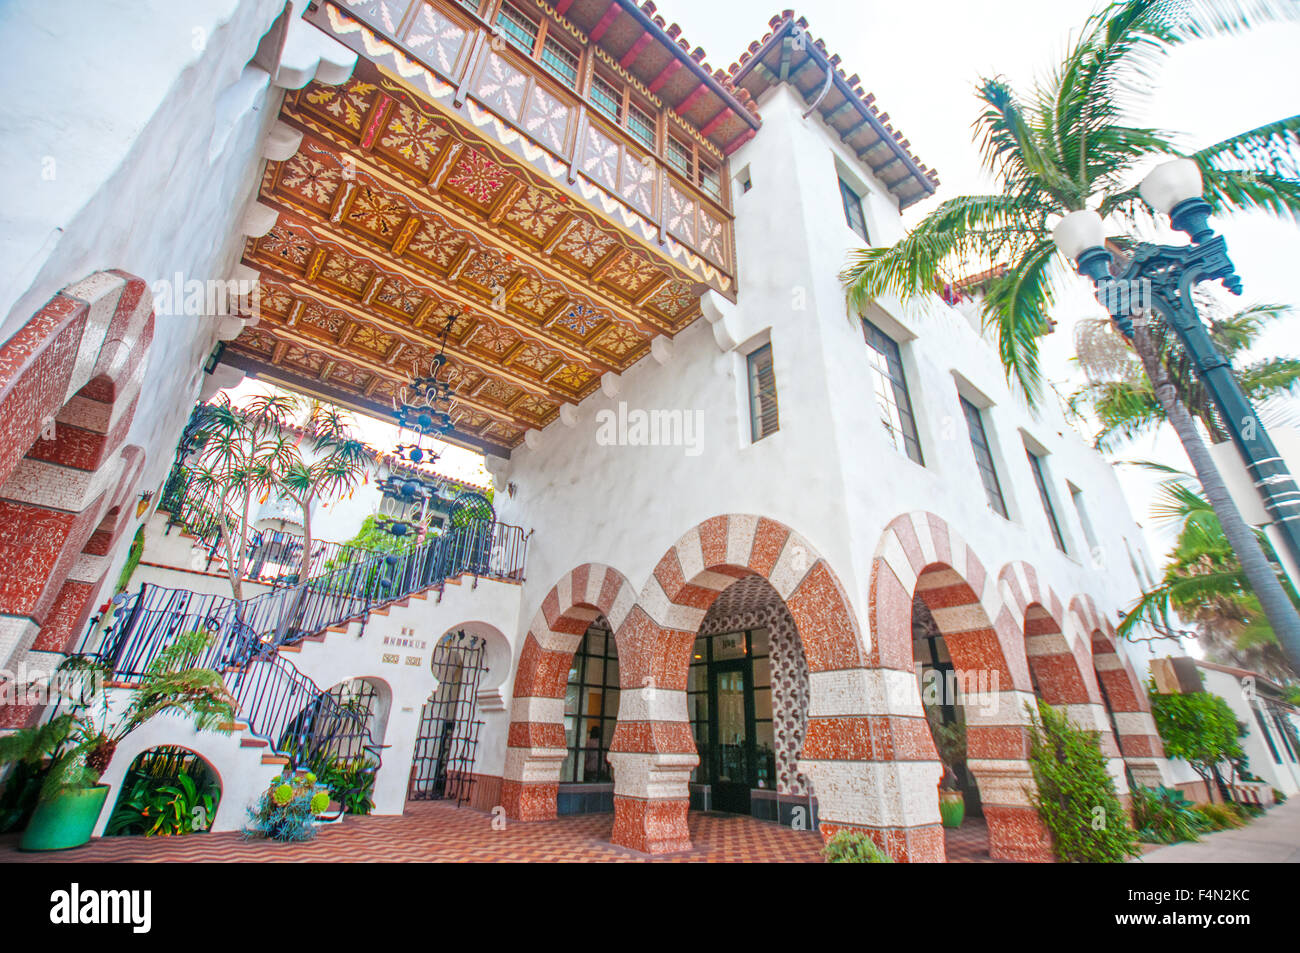 One of Jeff Shelton's buildings featured on his walking tour in Santa Barbara, California Stock Photo